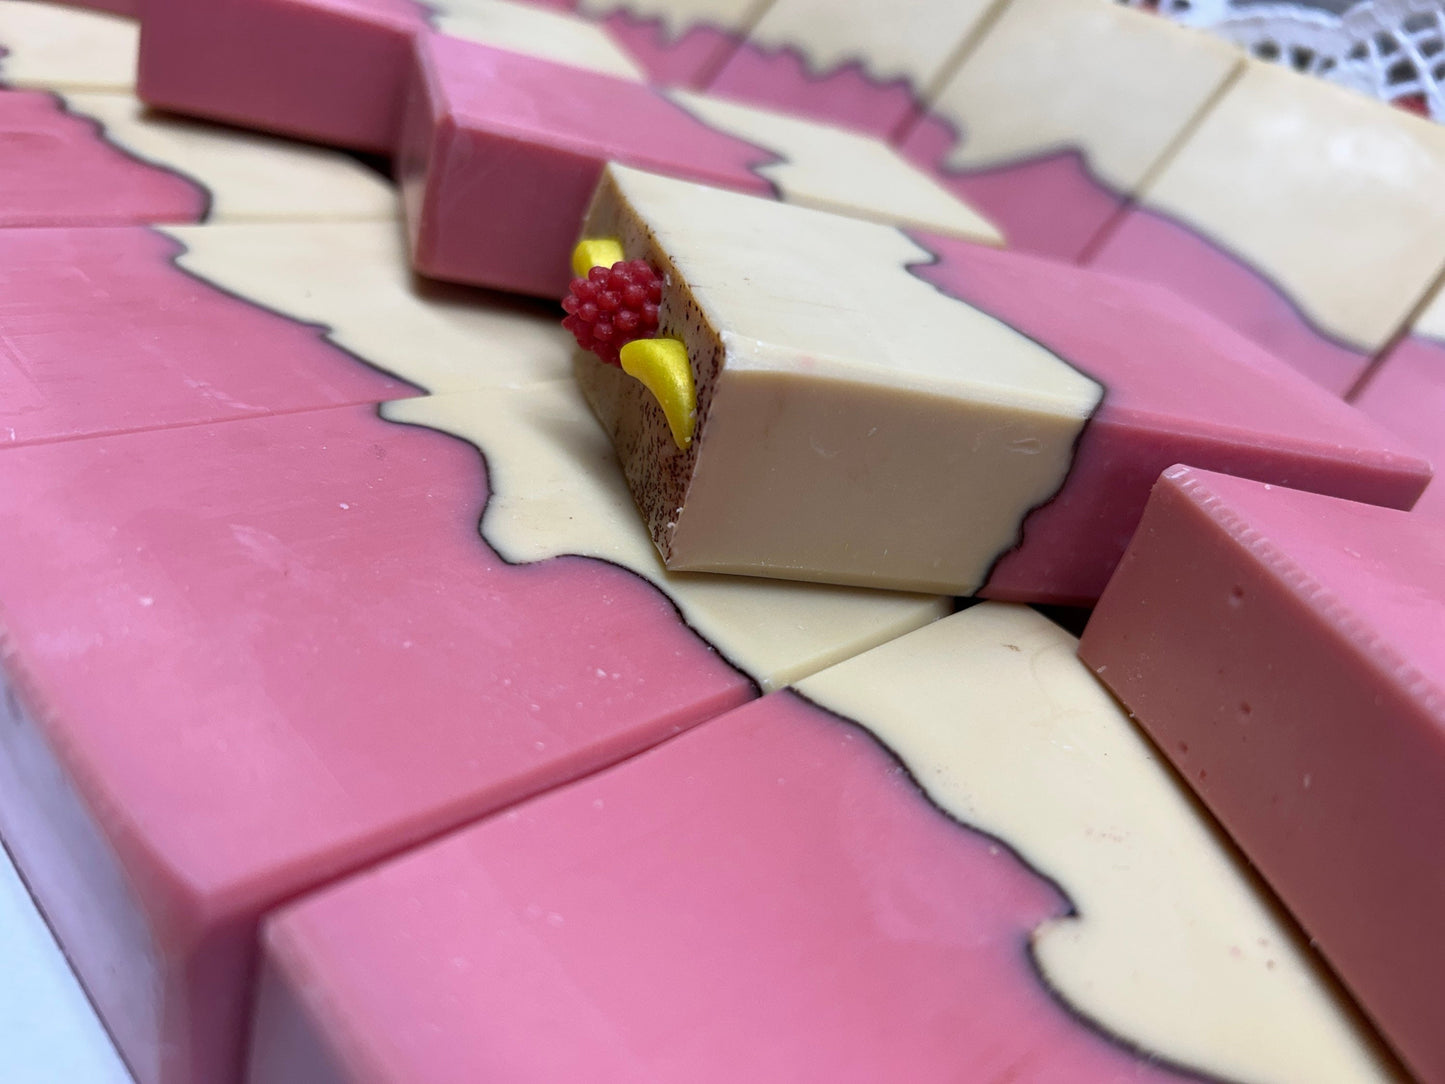 Banana Raspberry Soap, Cleansing, moisturizing, fruity scent, loads of white creamy bubbles! Great gift!